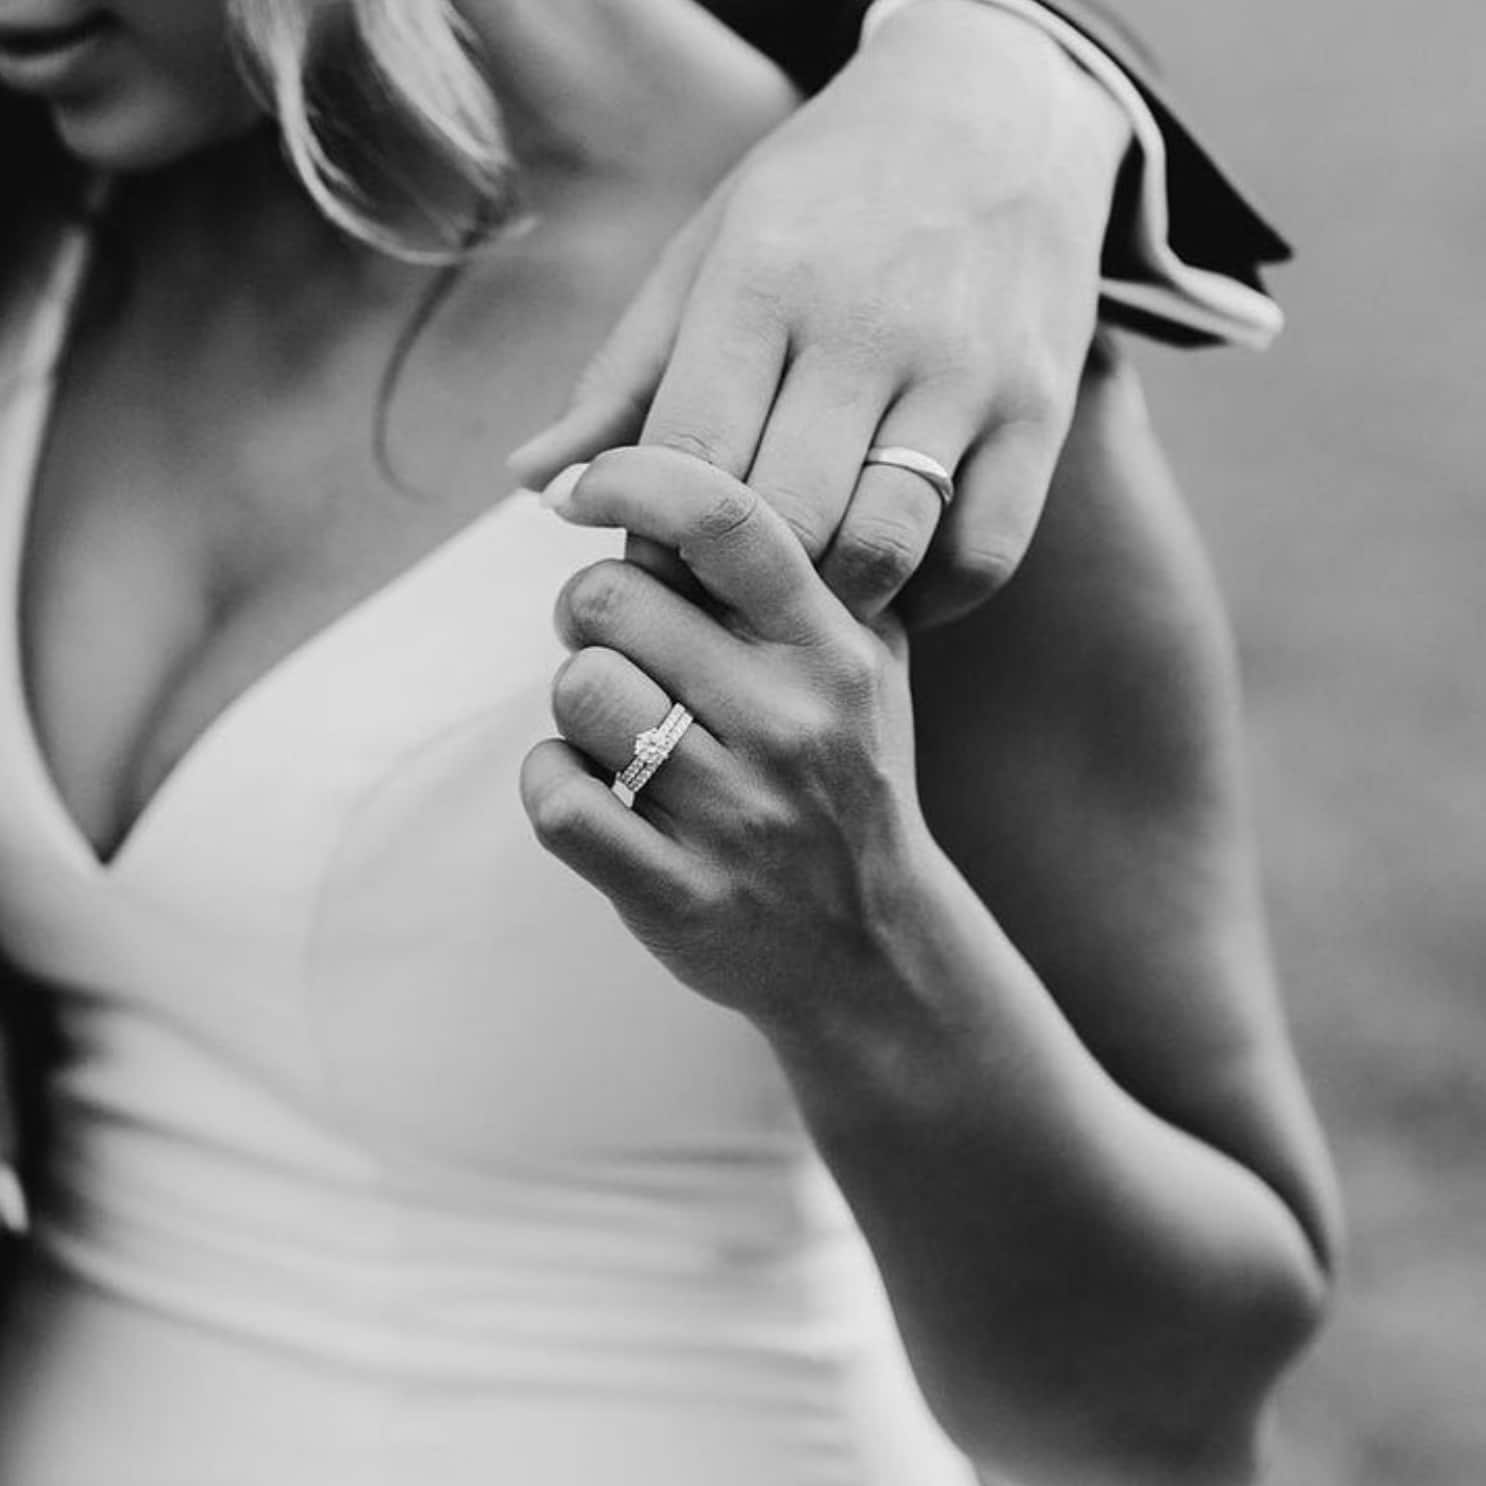 What Hand Does the Engagement Ring Go On? A Guide to Wedding Ring Fingers